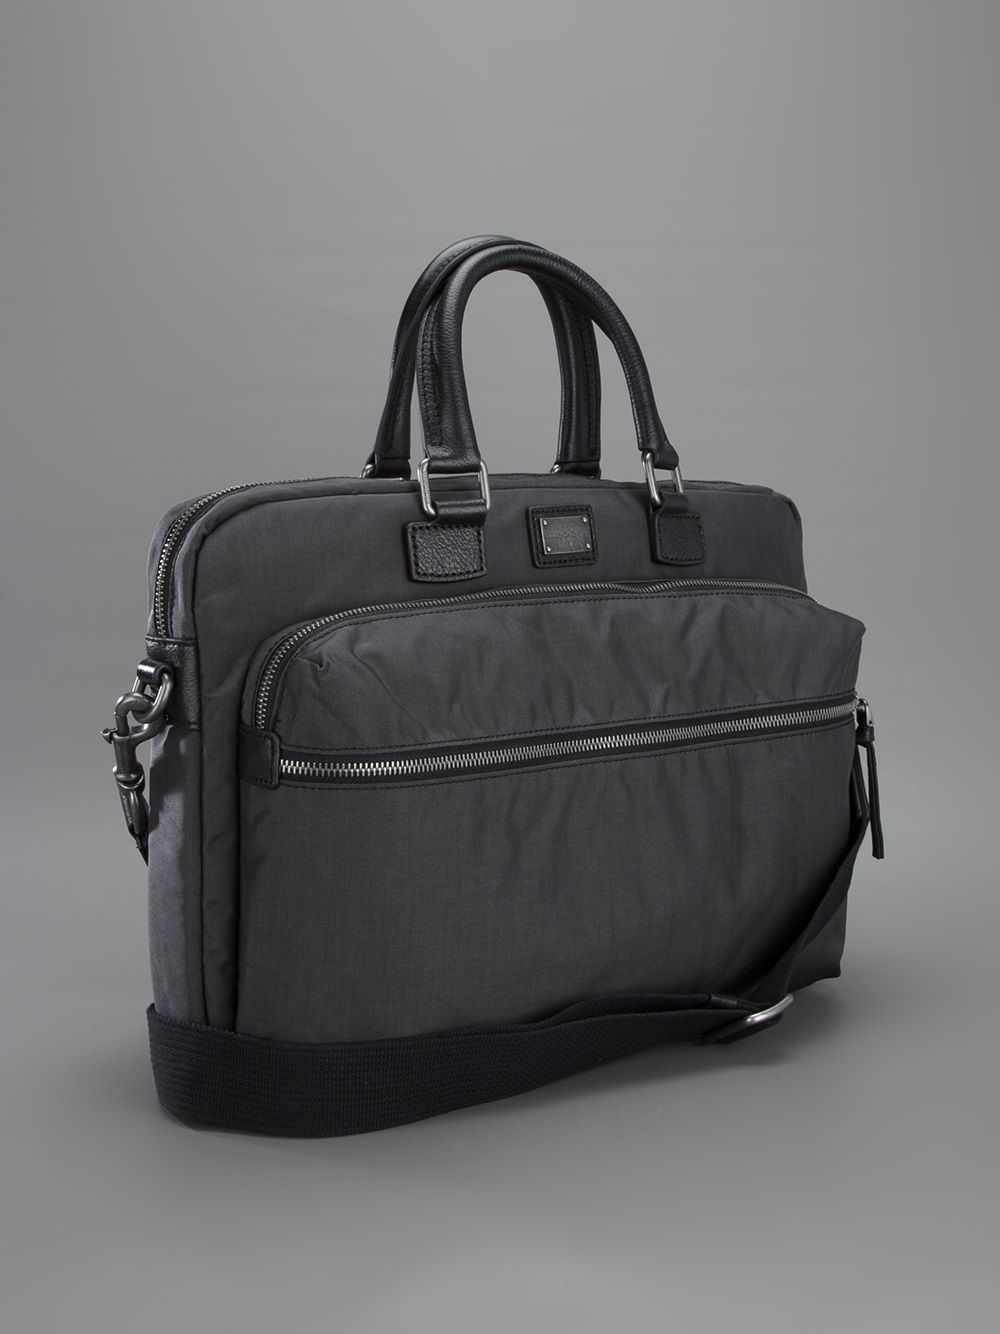 Lyst - Dolce & gabbana Leather Handle Briefcase in Gray for Men